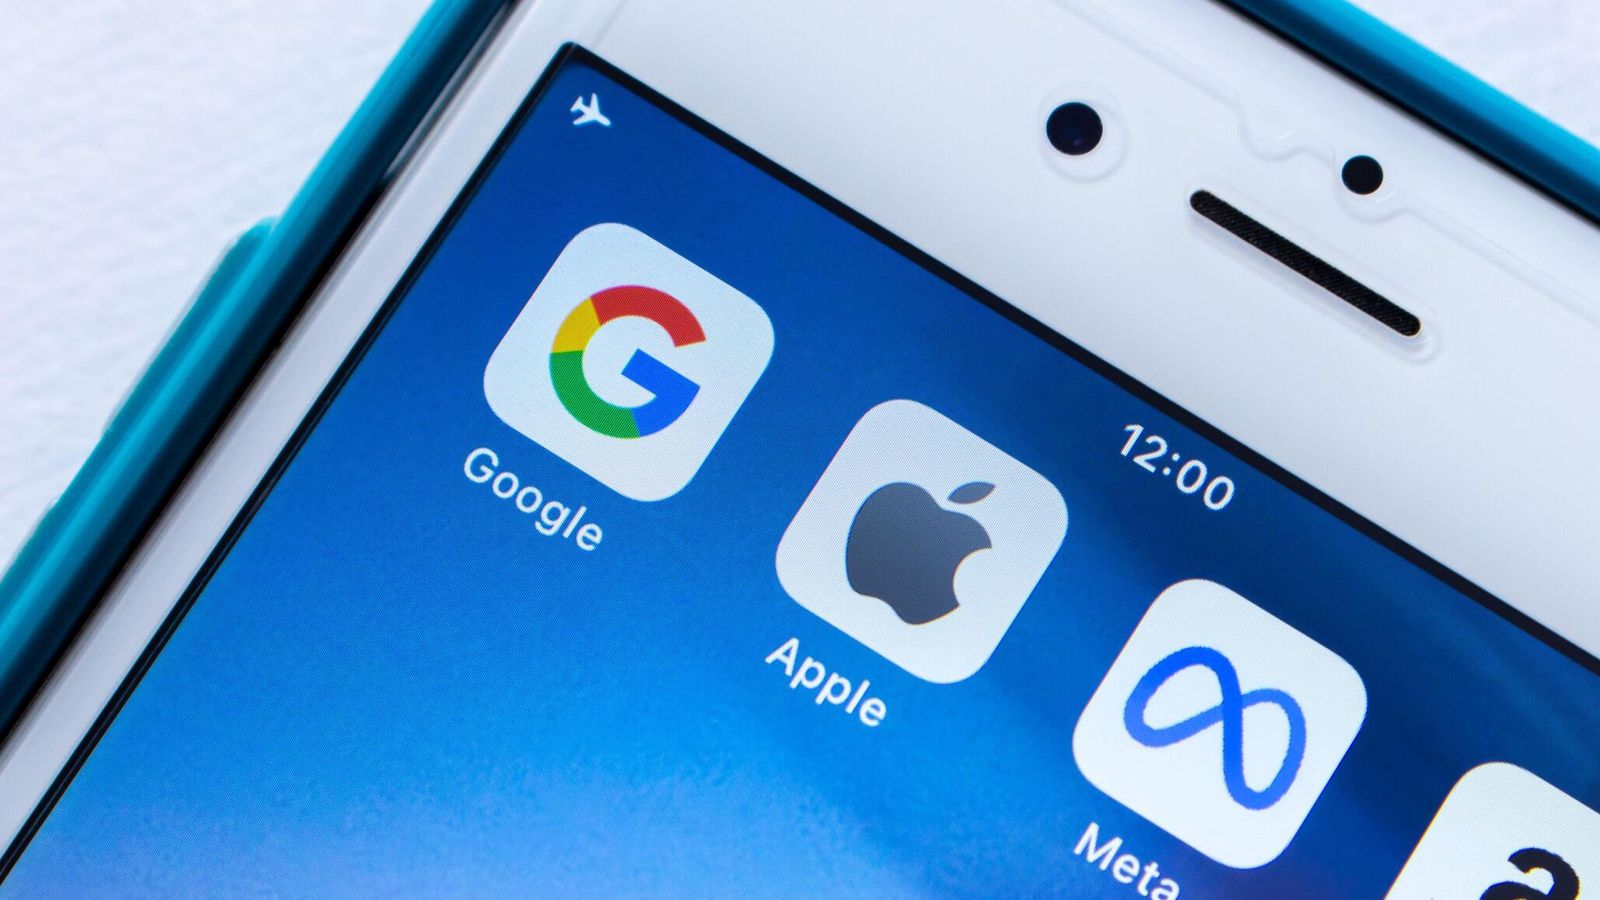 Apple, Meta, and Google’s parent company are currently under investigation by the European Union based on new laws designed to regulate the power of global technology giants.